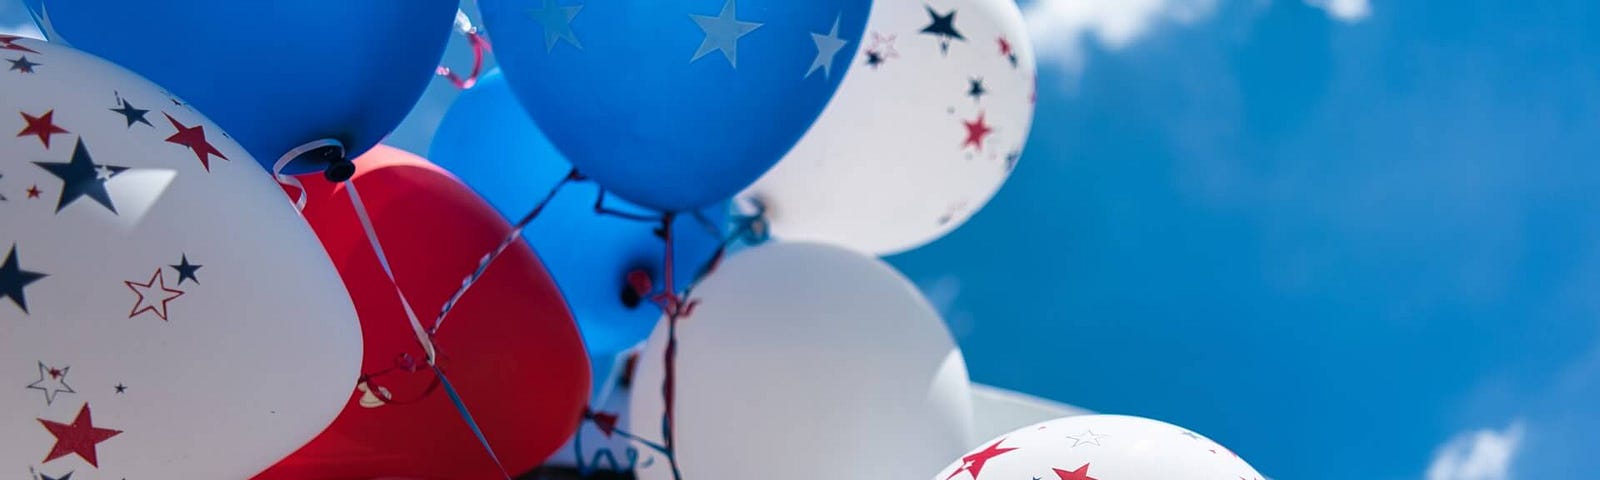 United States Flag with blue, red, and white balloons celebrating the American Independence Day on 4th of July